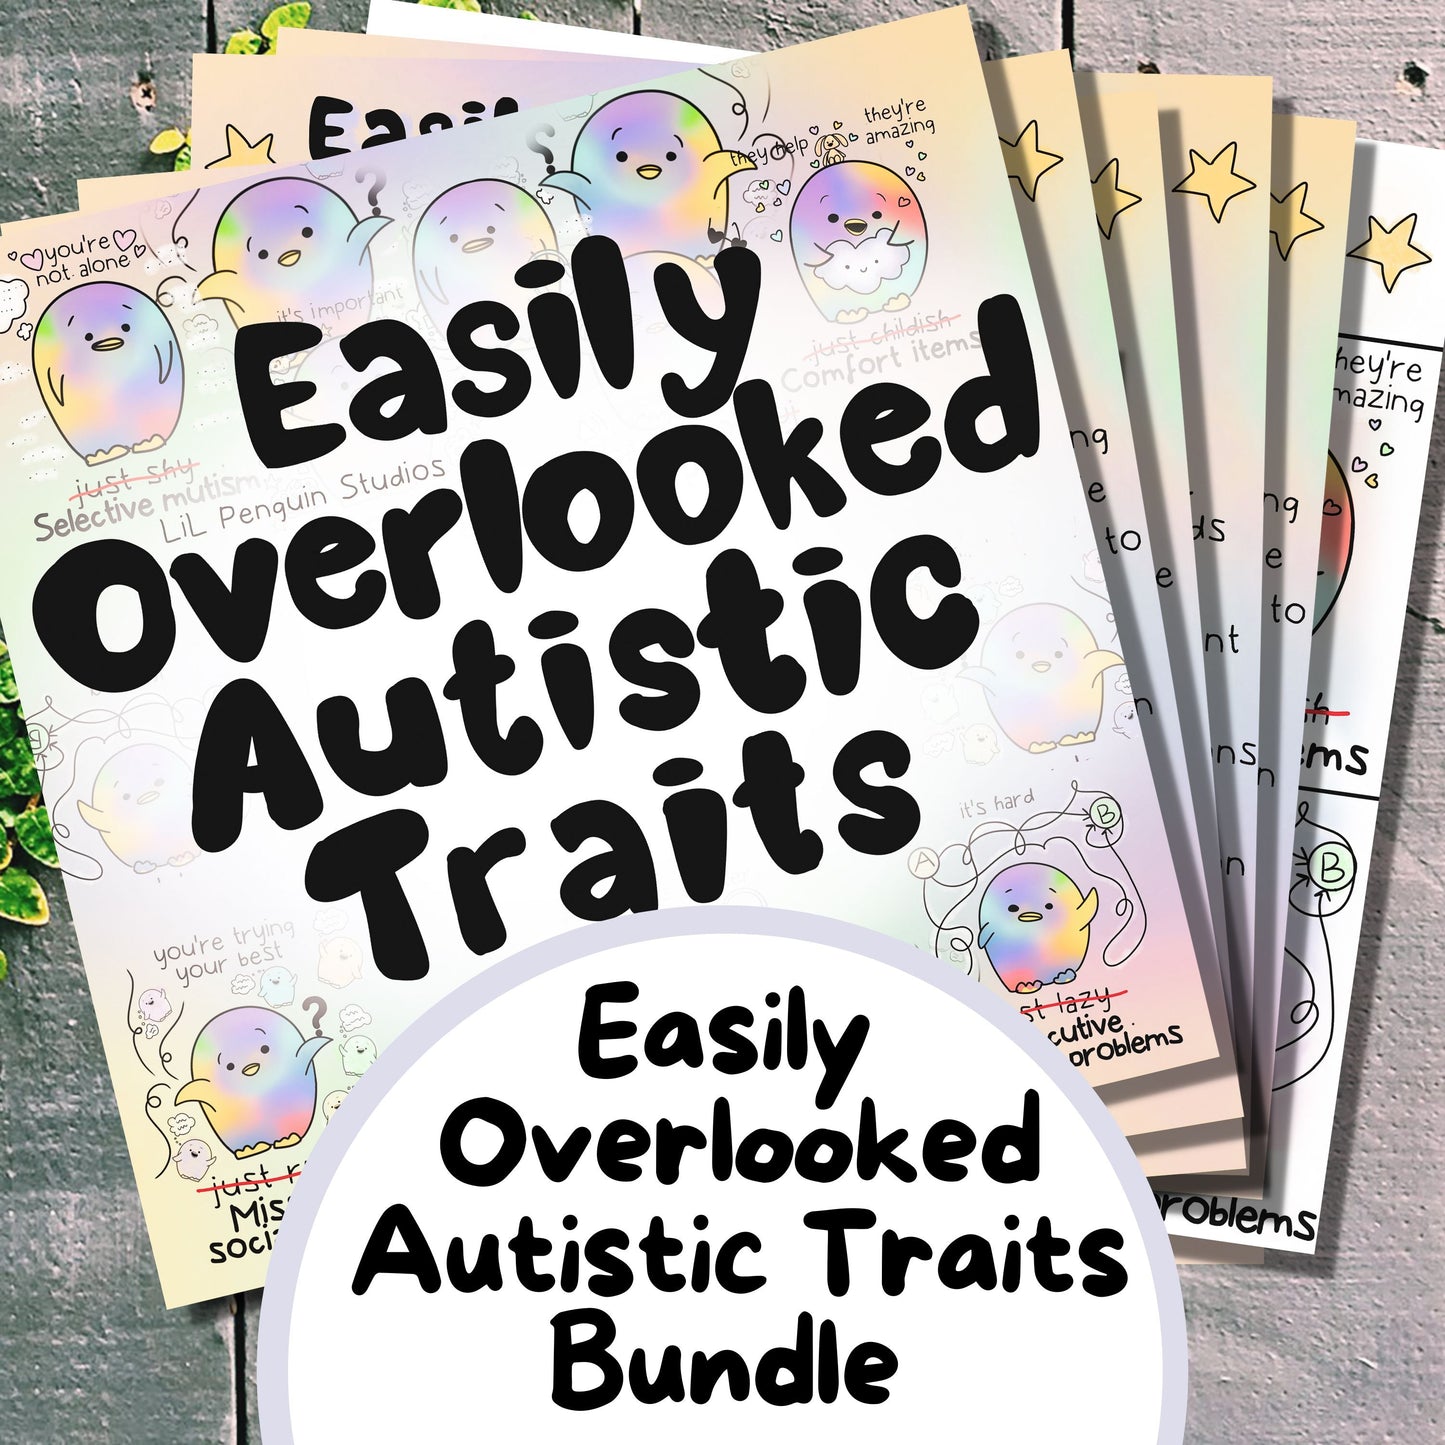 Easily Overlooked Autistic Traits Printable Bundle hand drawn by an autistic artist (LiL penguin Studios). Page titles: selective mutism / situational mutism, sensitivities, executive function problems, missing social cues, comfort items, special interests.